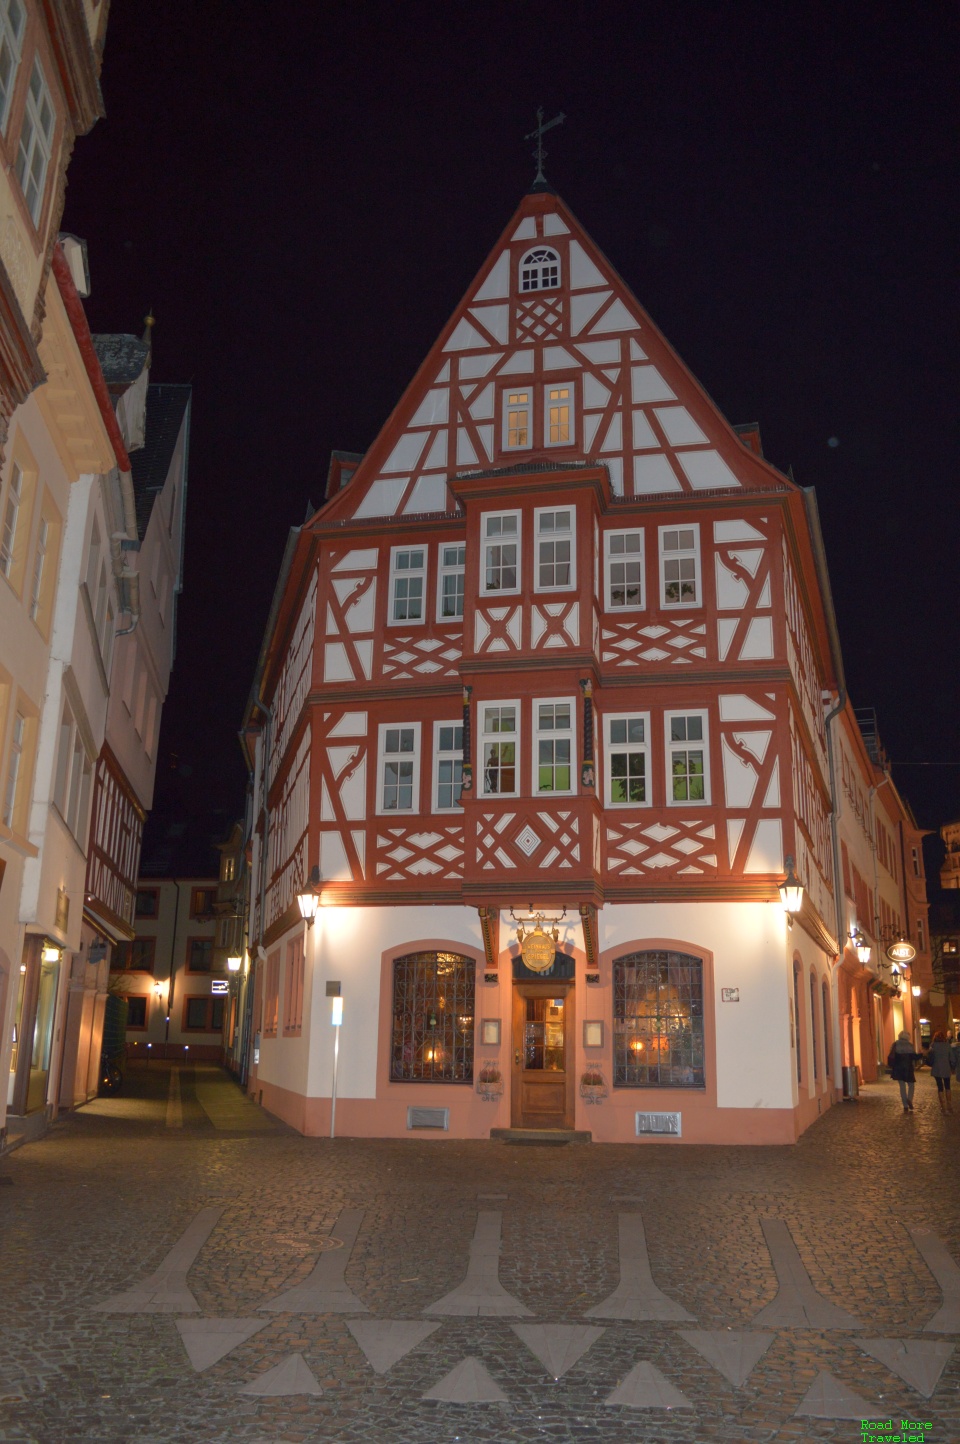 Gothic-style half-timbered building in Mainz